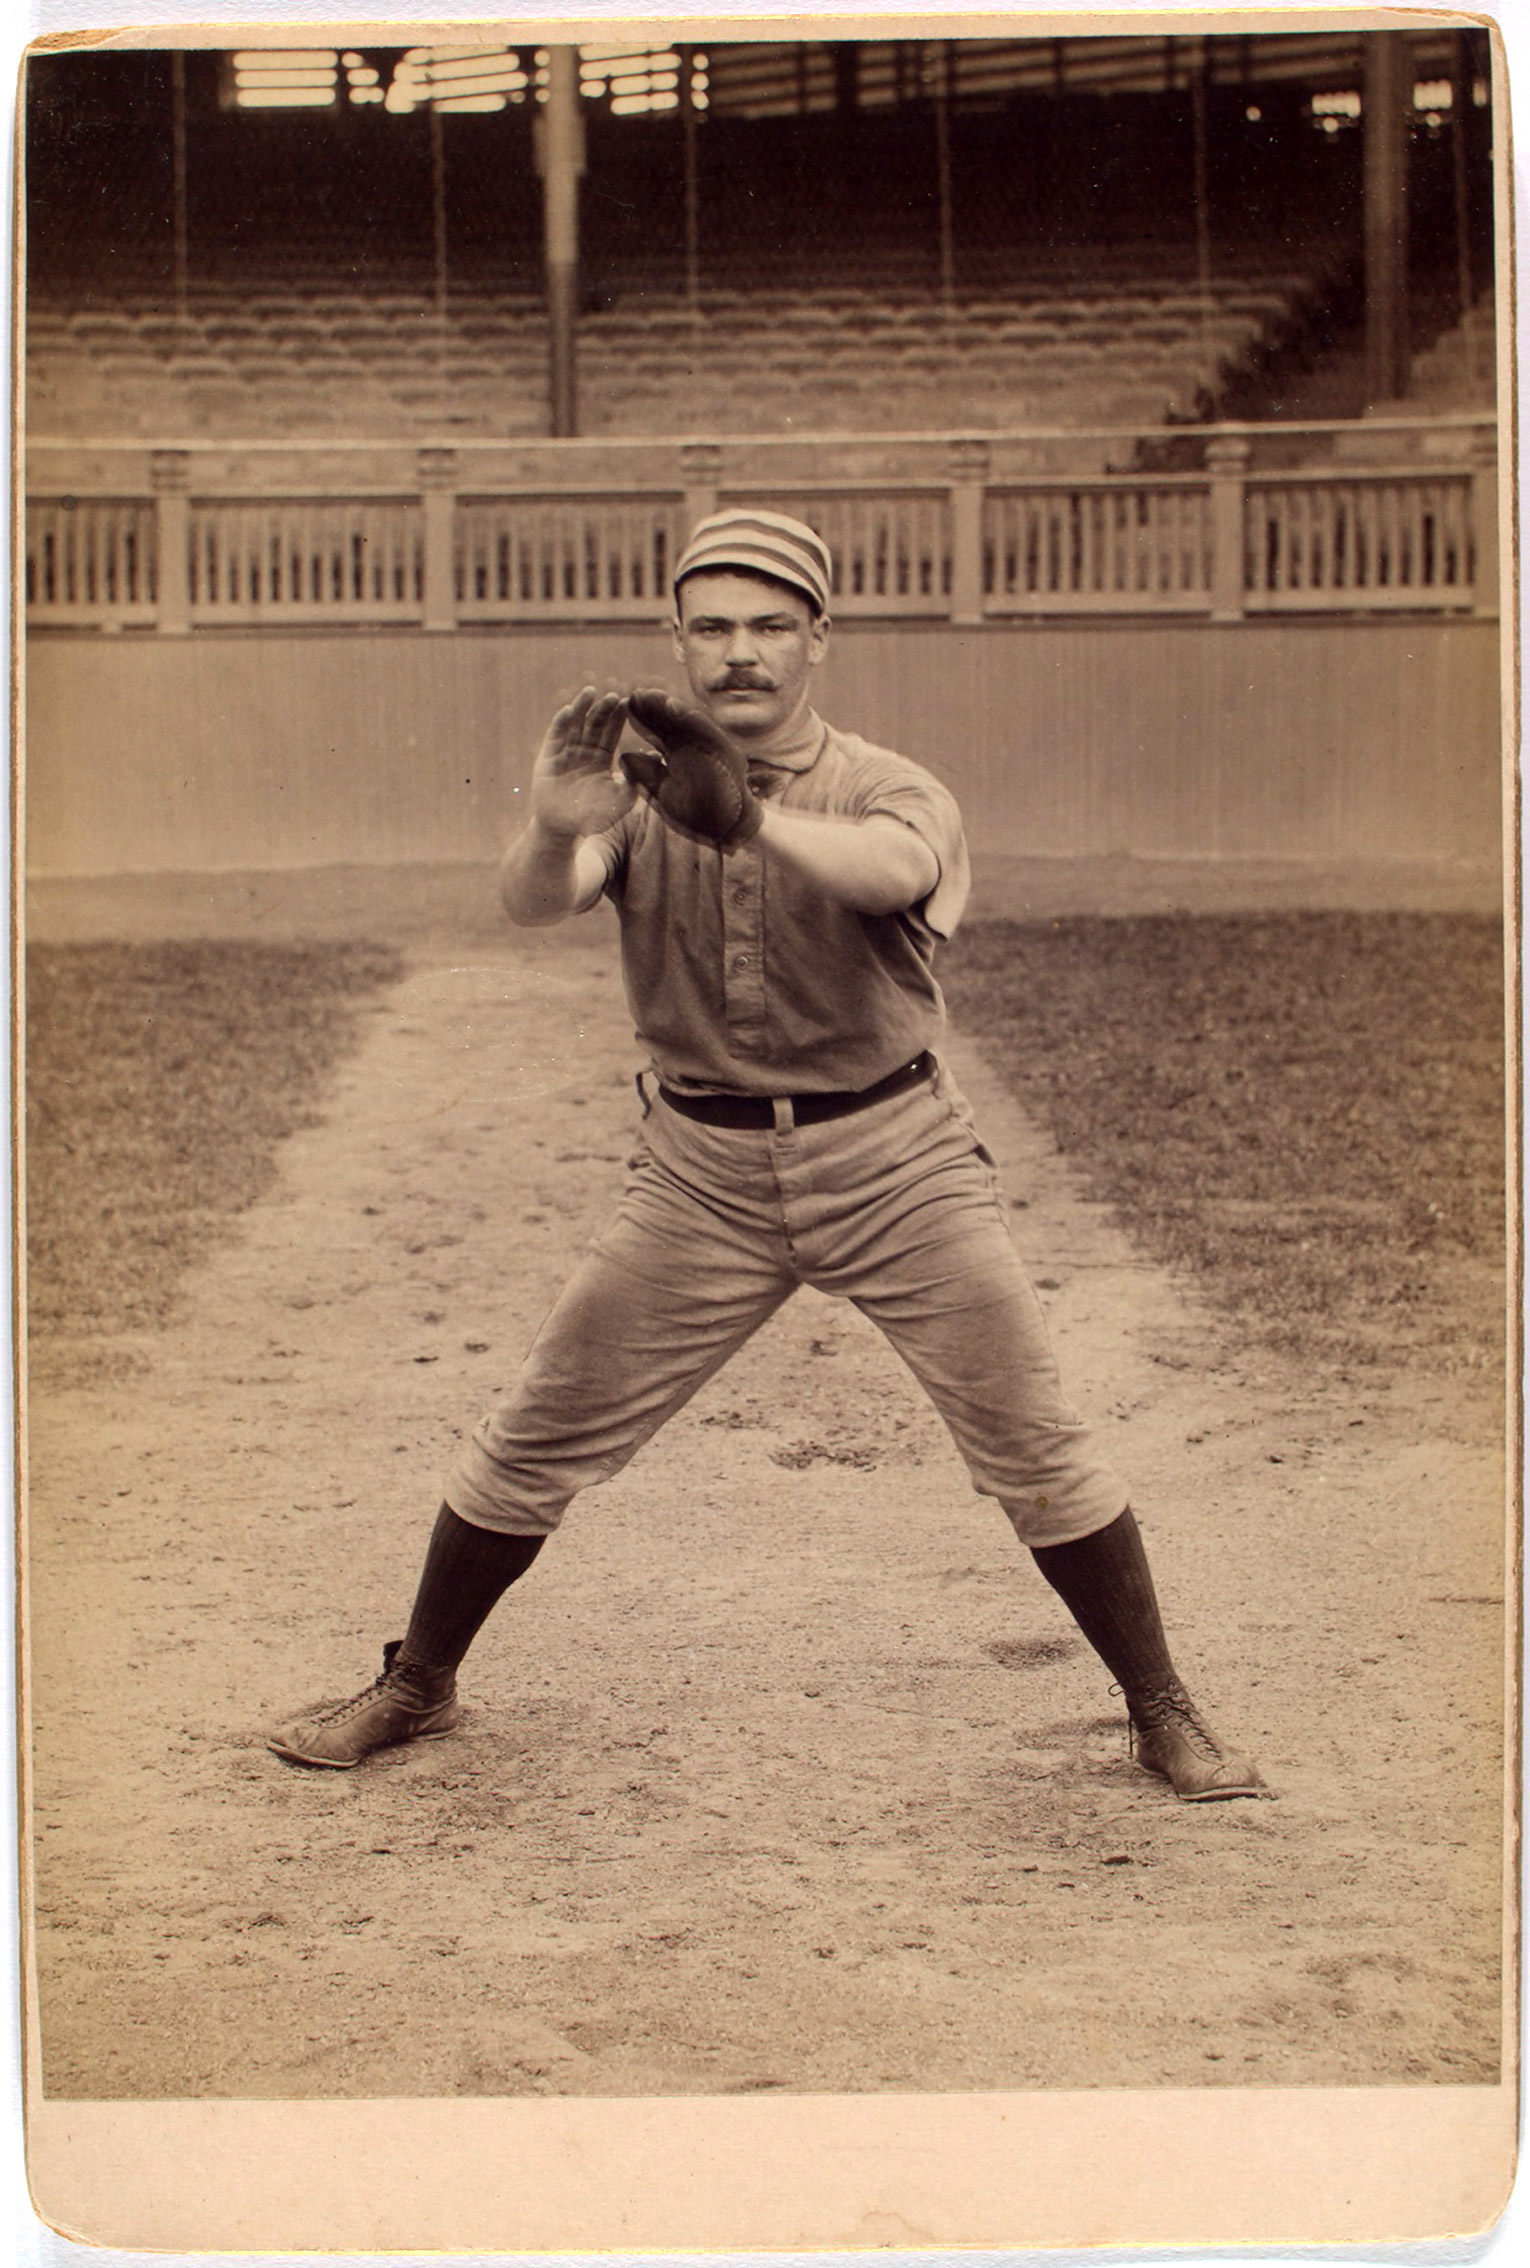 Deacon McGuire of the Philadelphia Quakers. From the A. G. Spalding Baseball Collection.